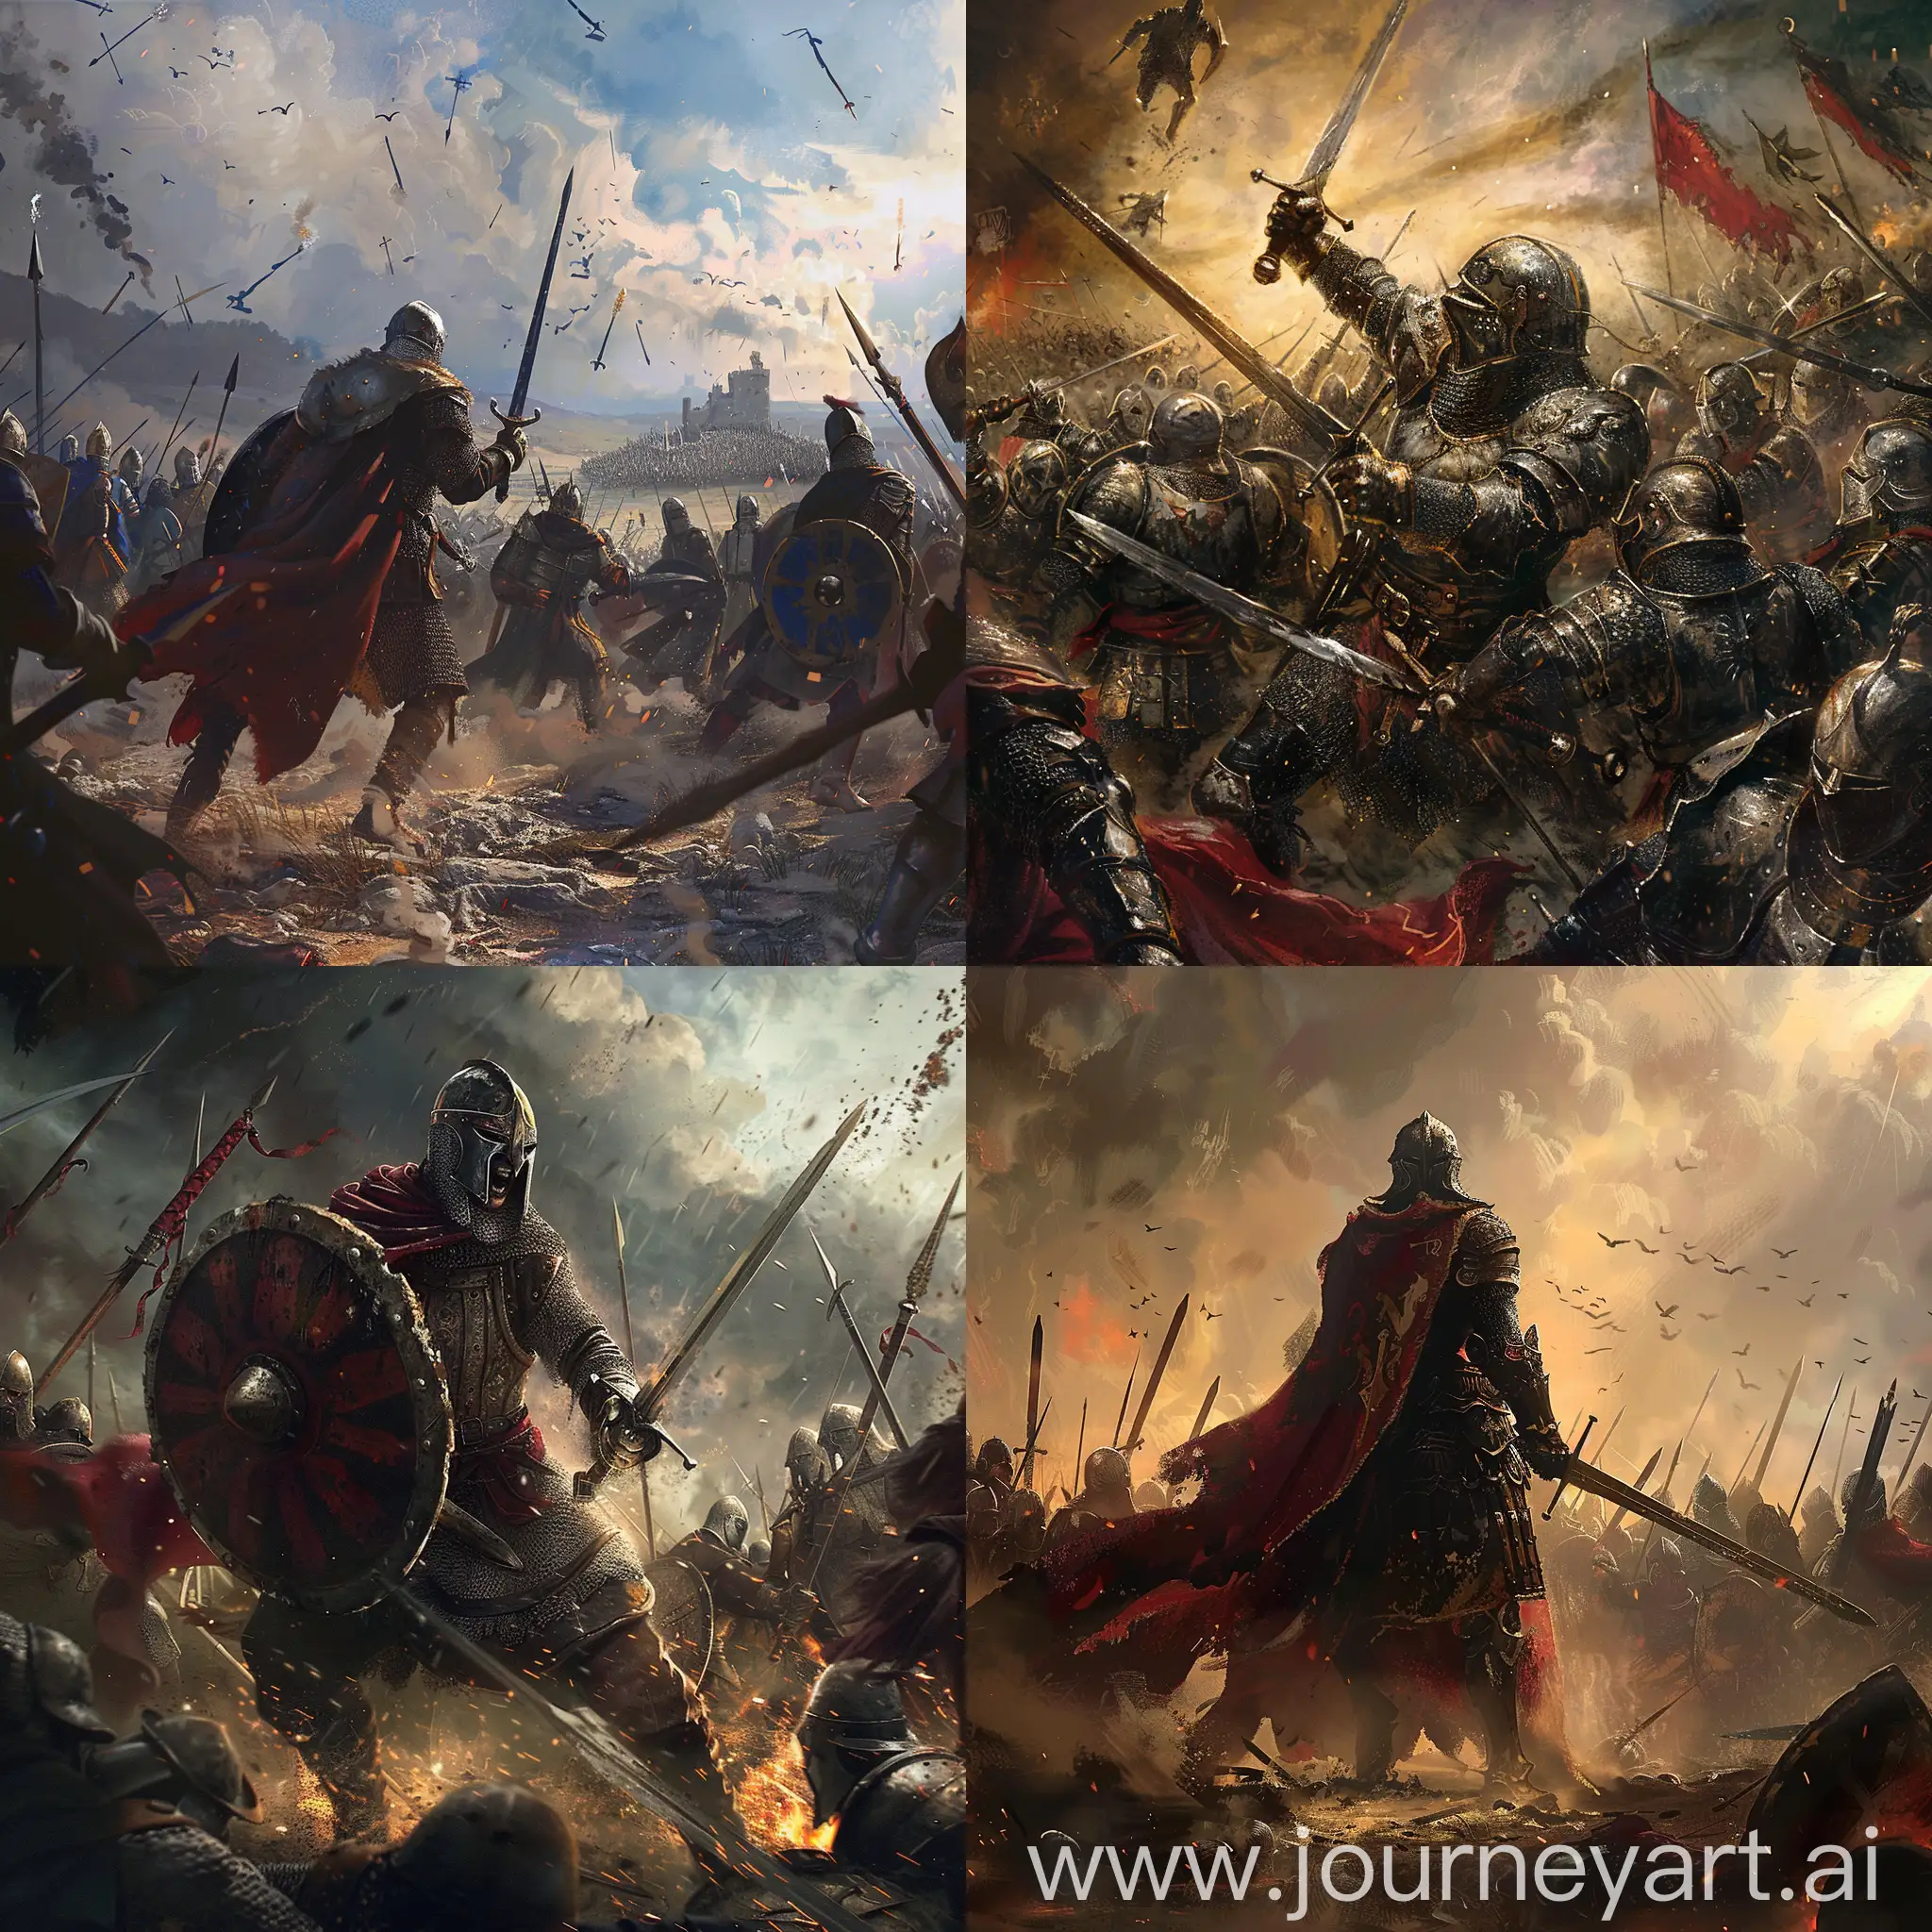 warrior inside the battle surrounded by knights